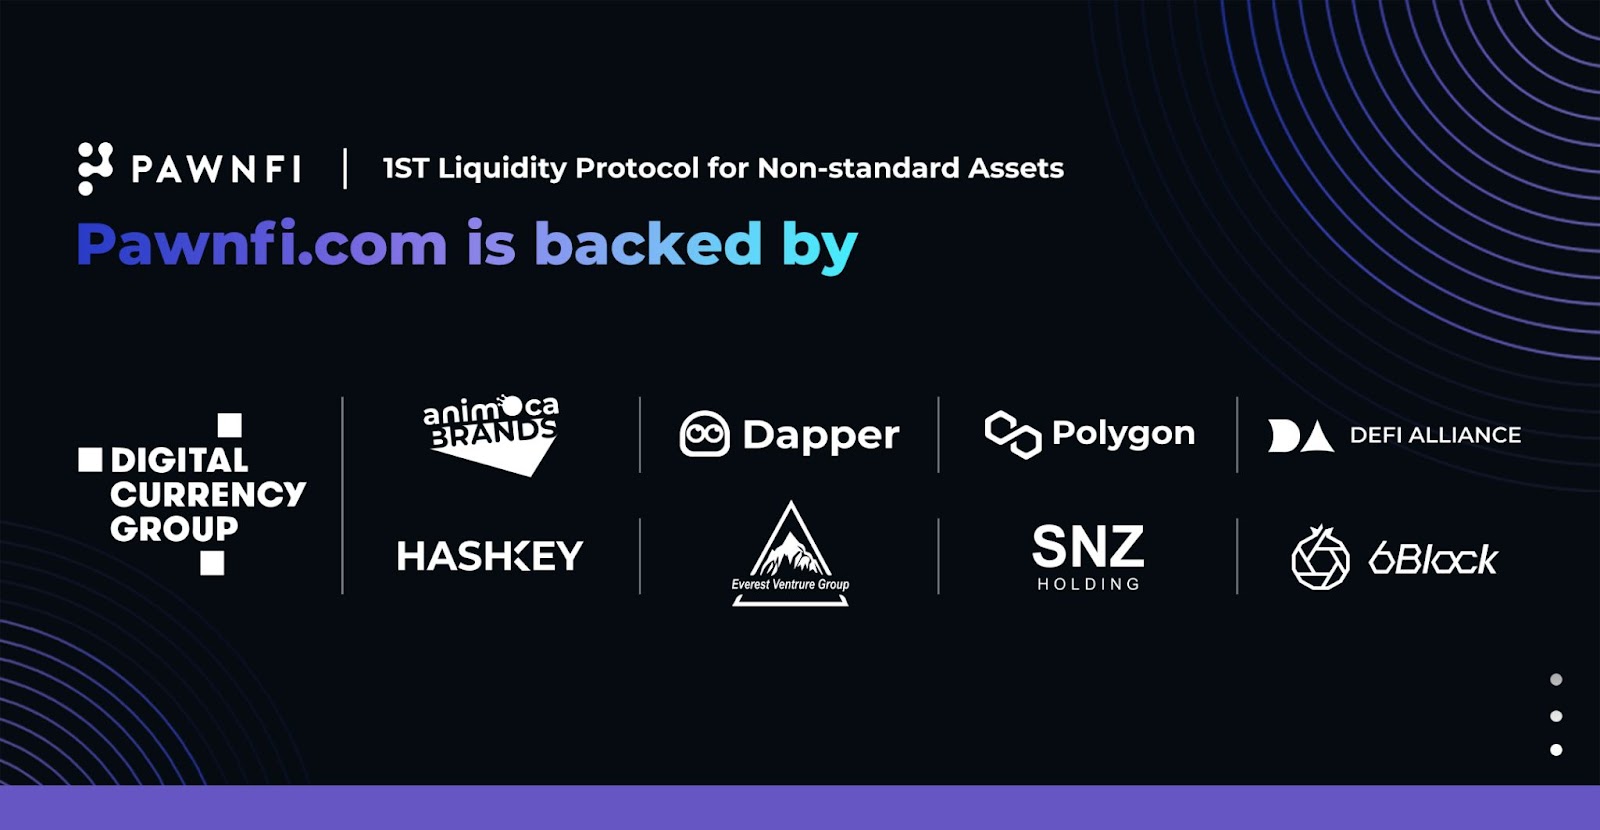 Pawnfi.com Raises $3M to Launch the First Liquidity Protocol for Non-Standard Assets 1